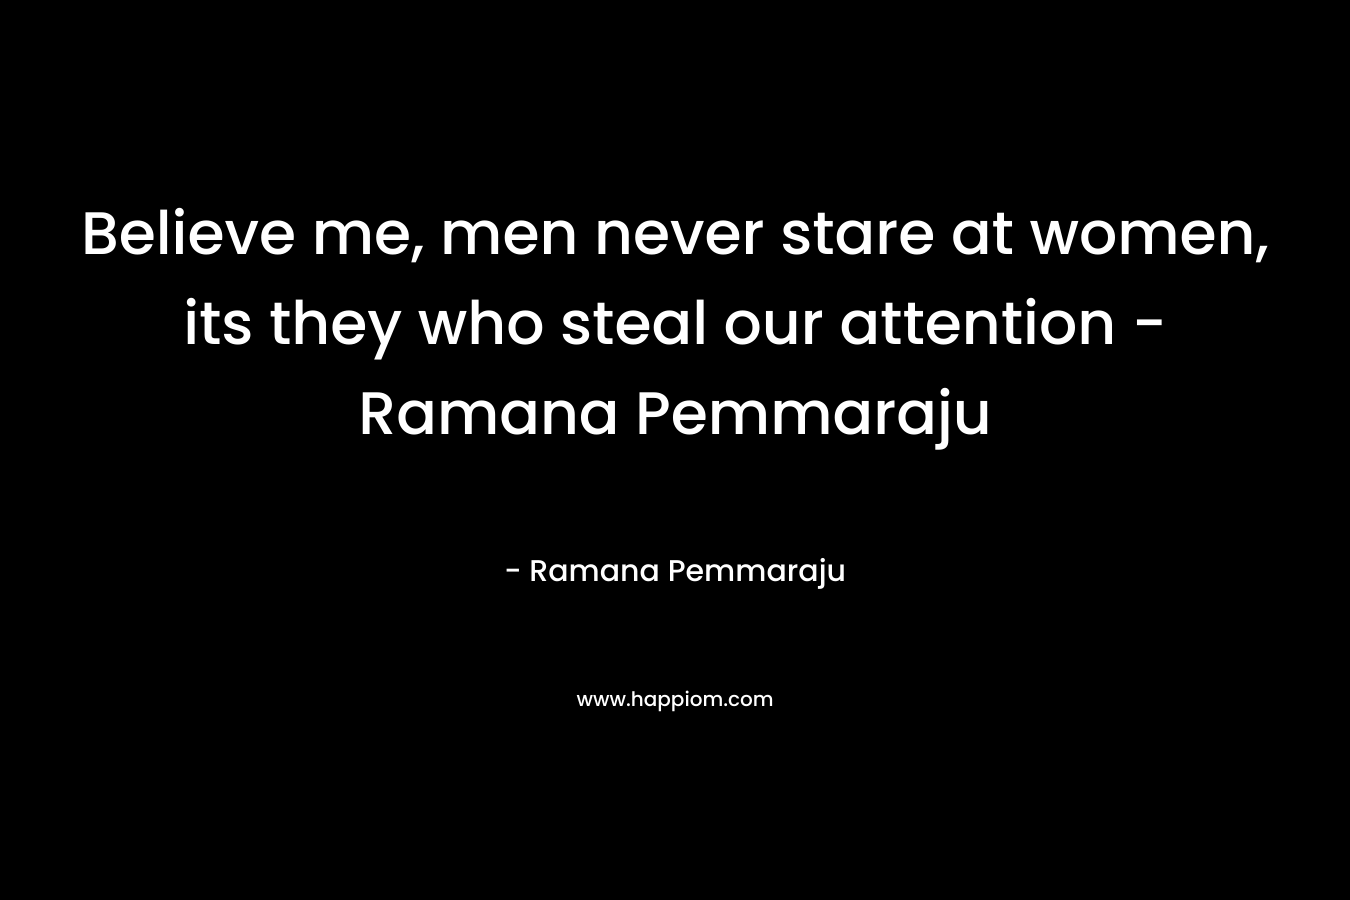 Believe me, men never stare at women, its they who steal our attention - Ramana Pemmaraju